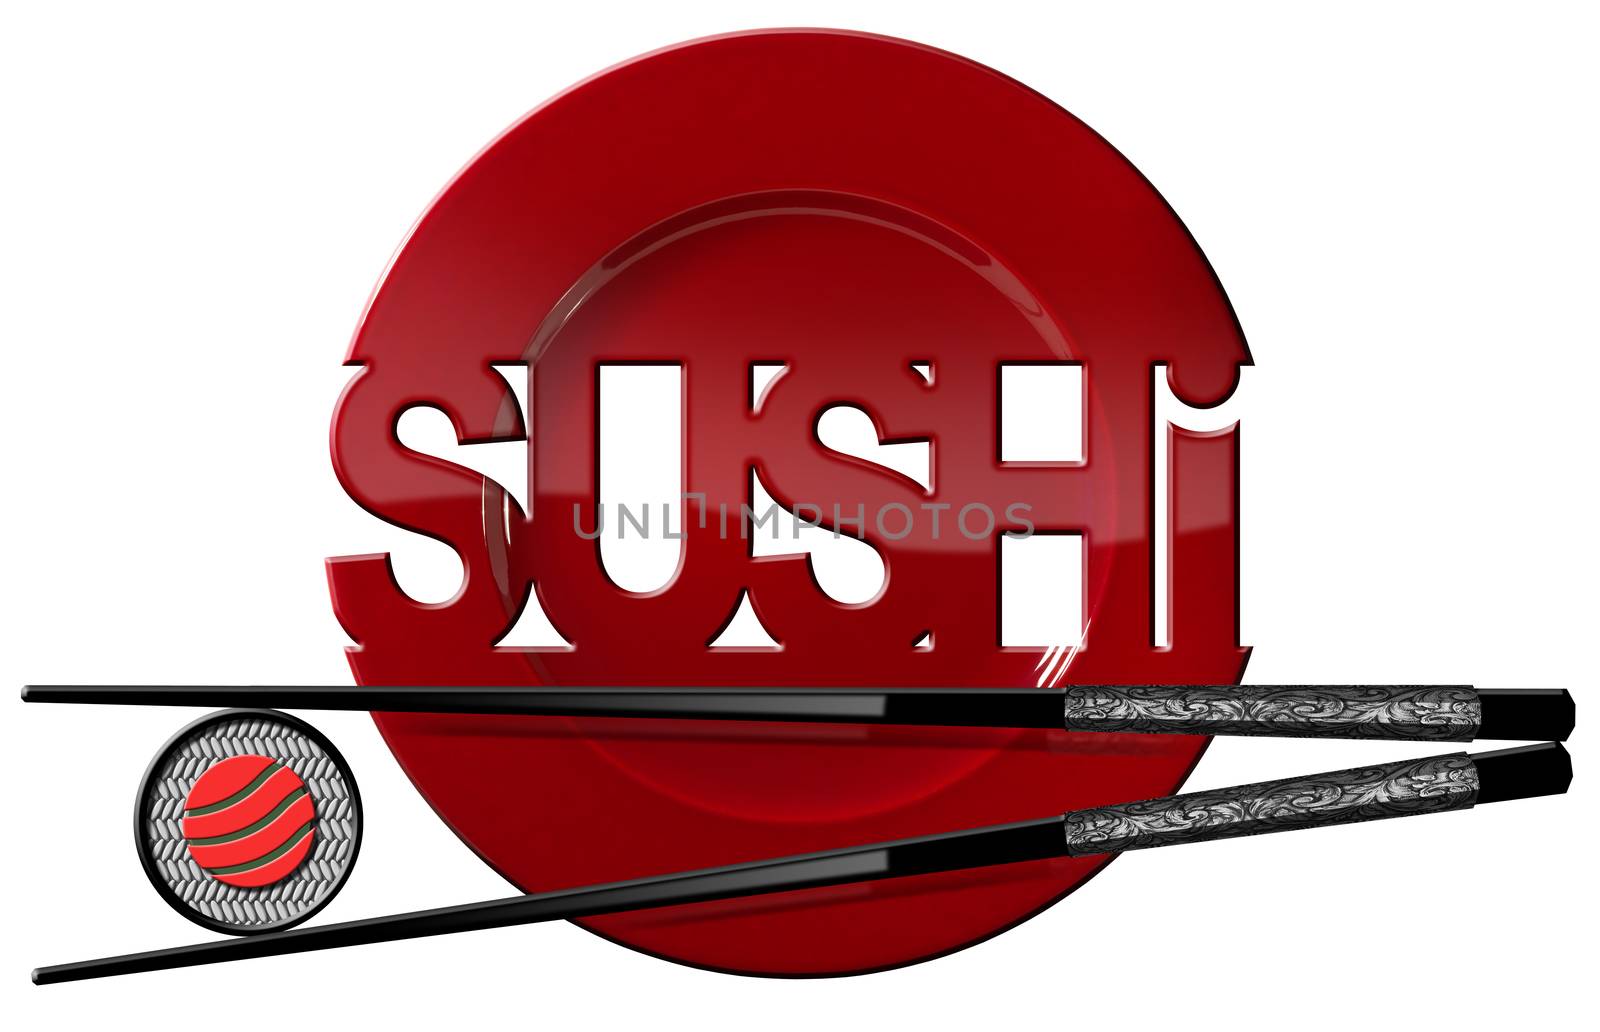 Sushi - Symbol with Plate and Chopsticks by catalby